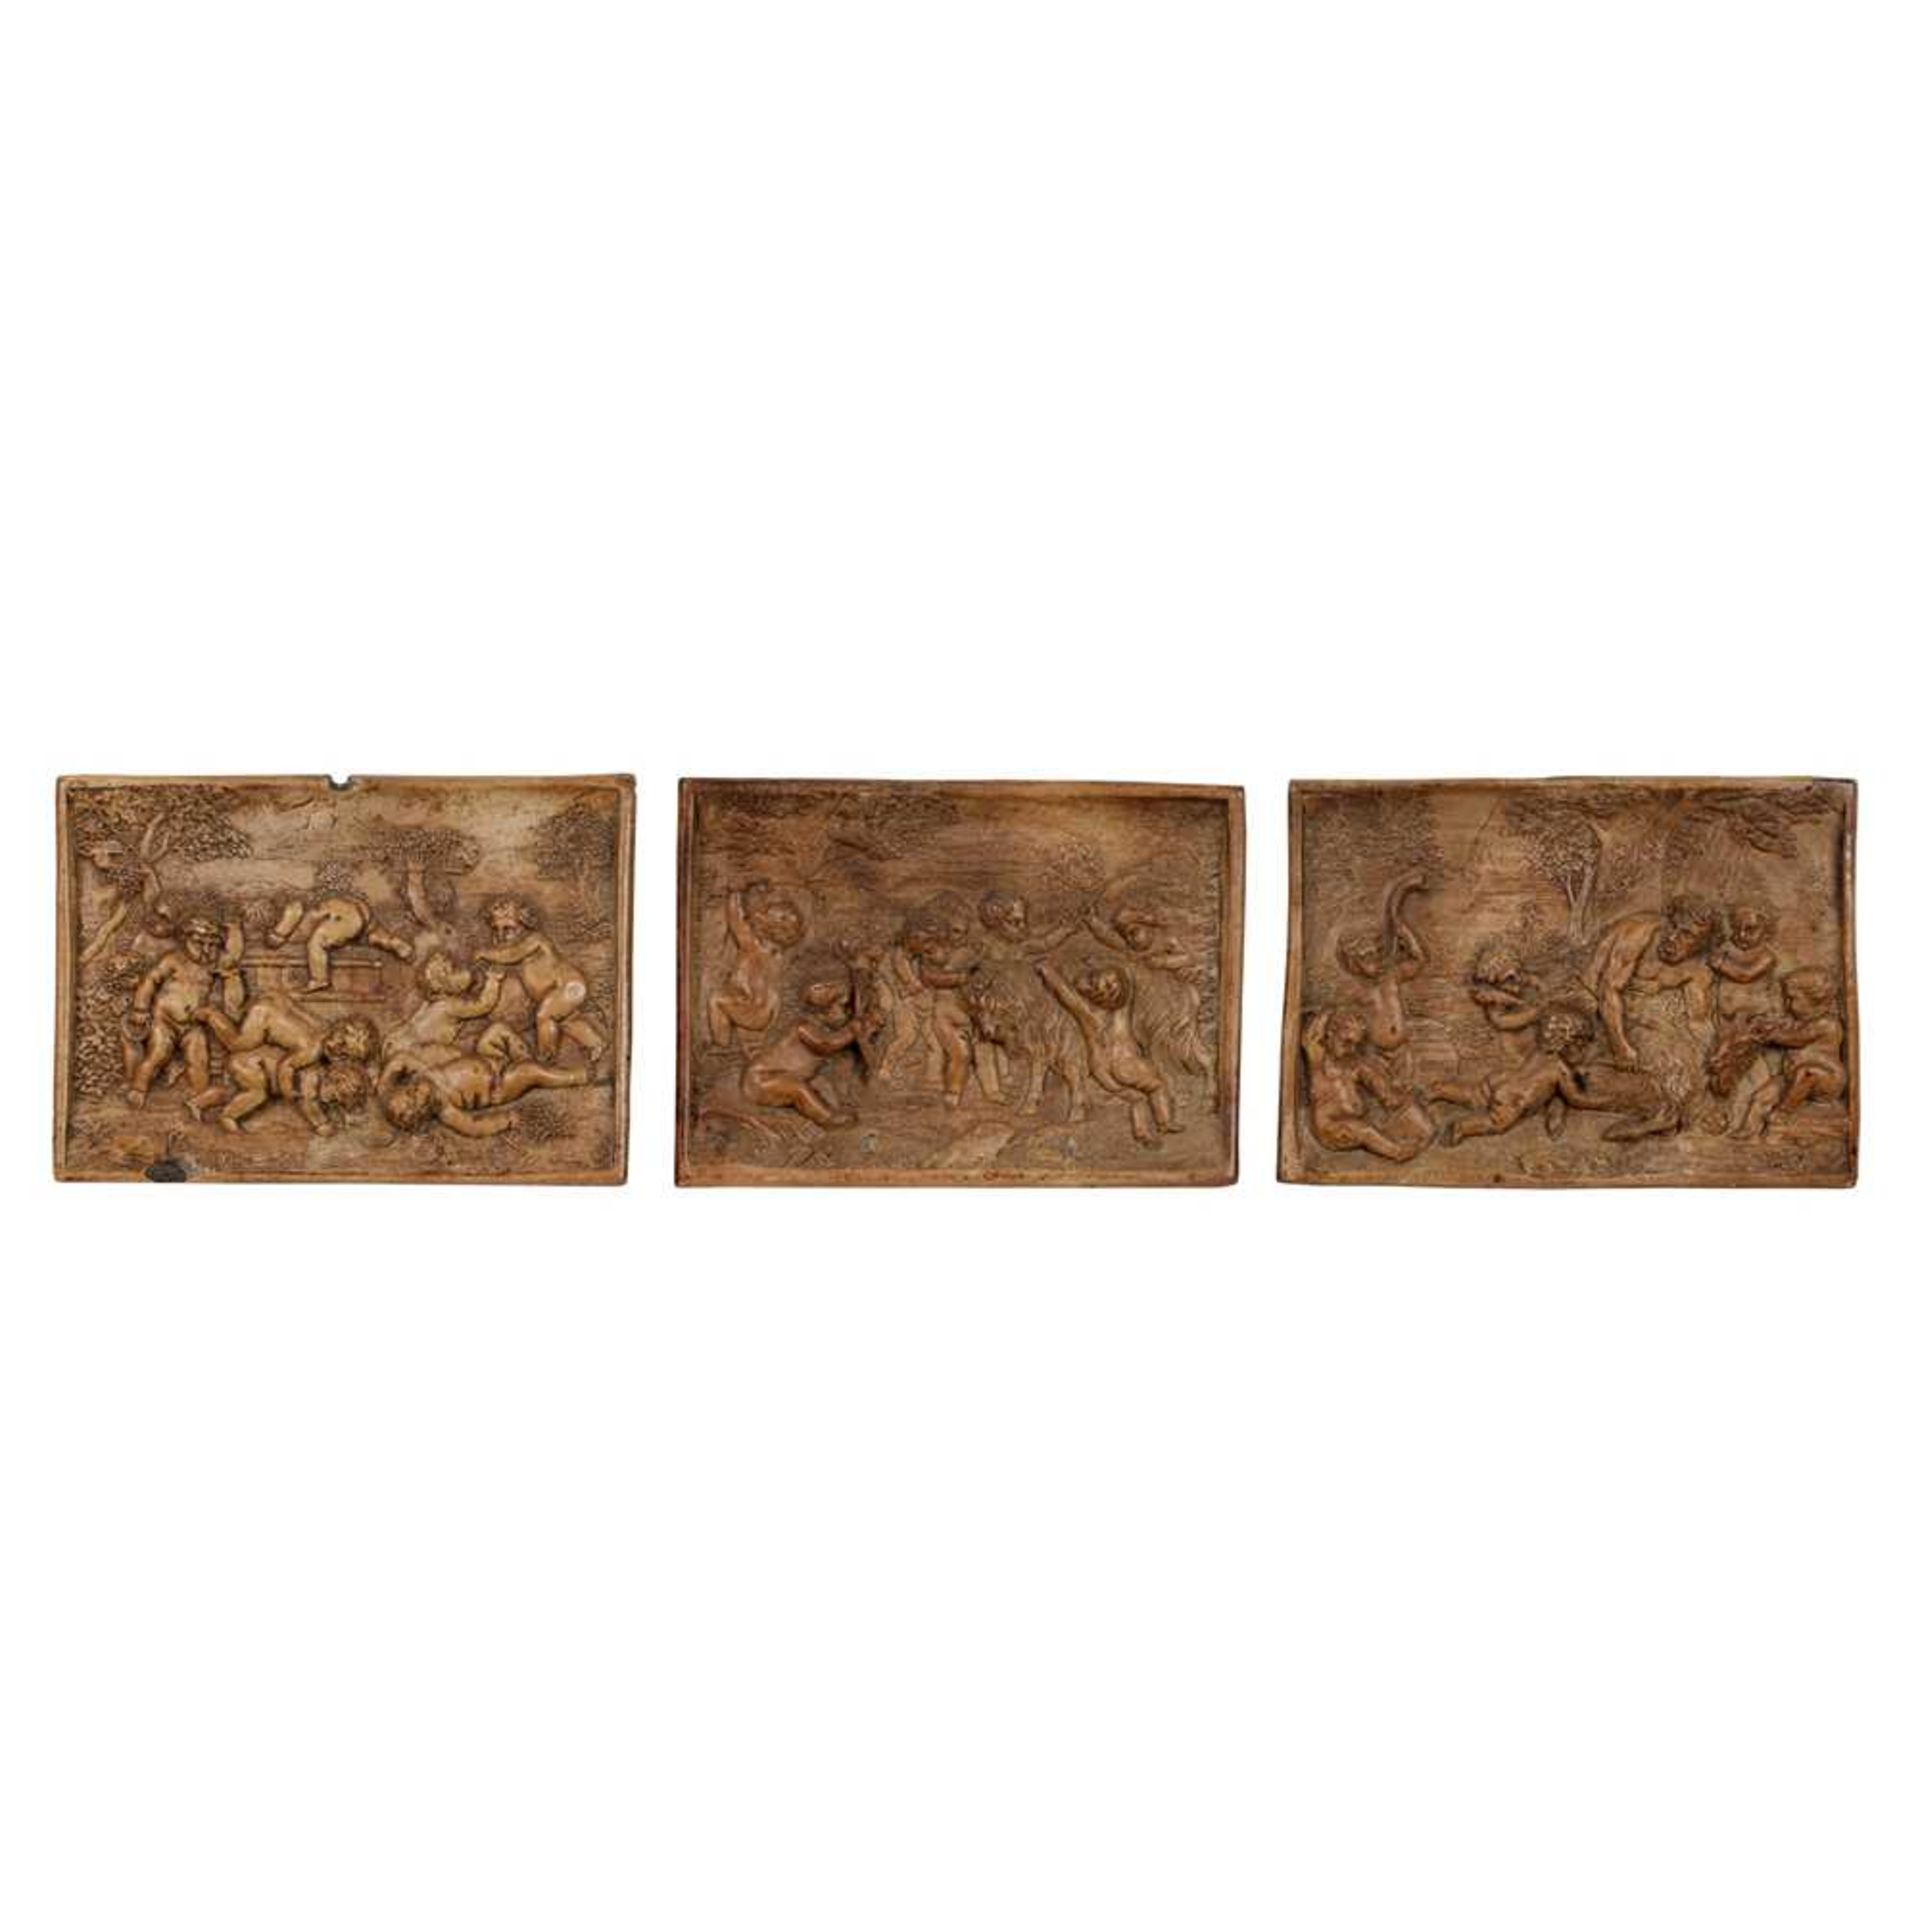 THREE TERRACOTTA RELIEF PLAQUES, AFTER FRANCIS DUQUESNOY 19TH CENTURY